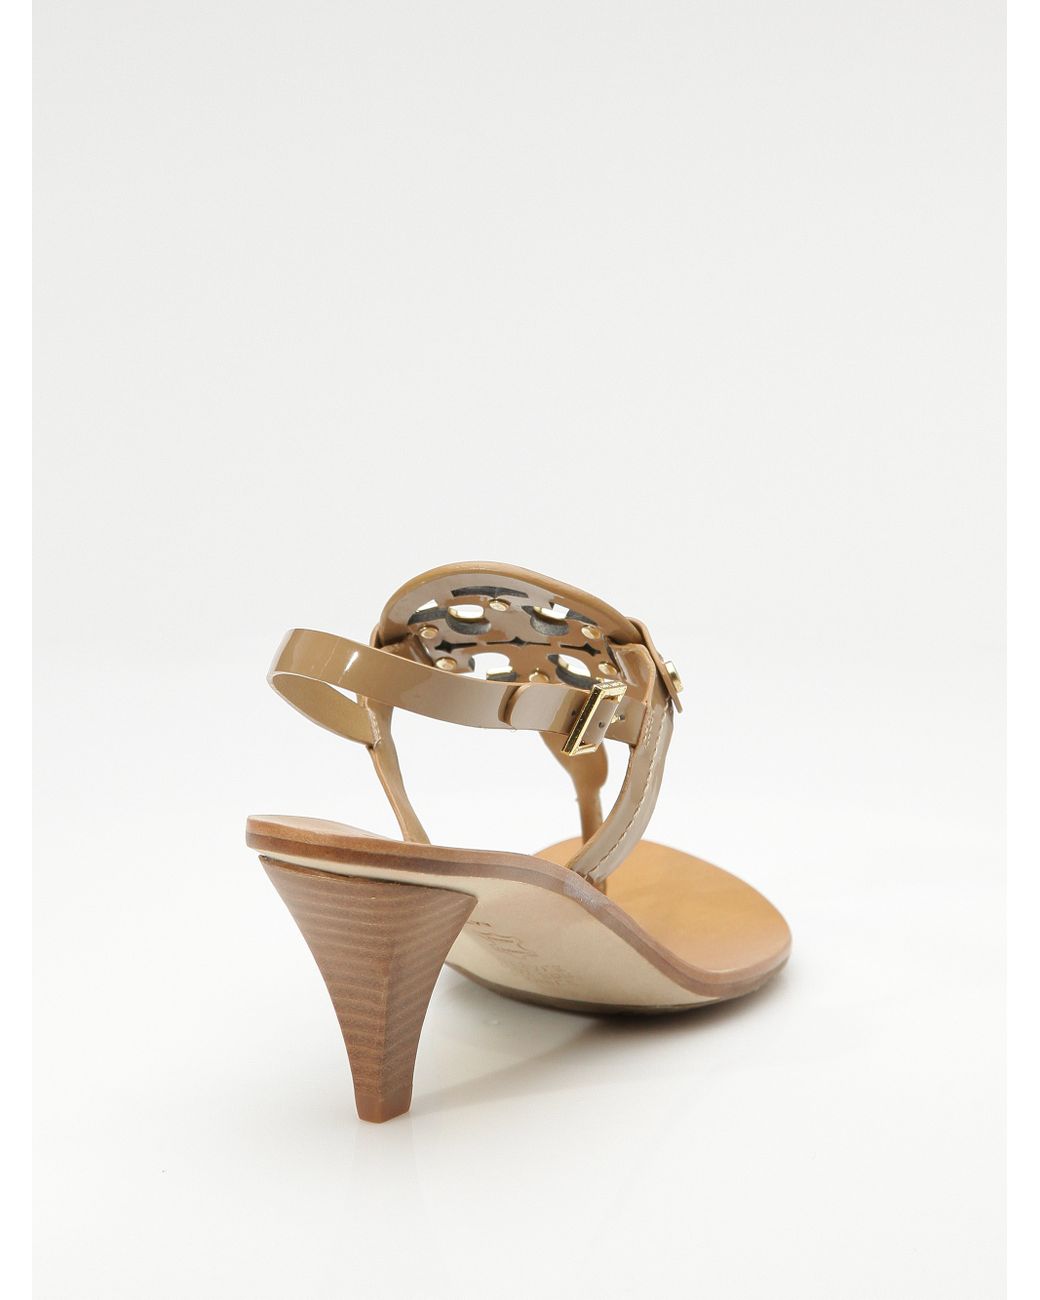 Tory Burch Holly 2 Kitten Heel Logo Patent Thong Sandals in Natural | Lyst